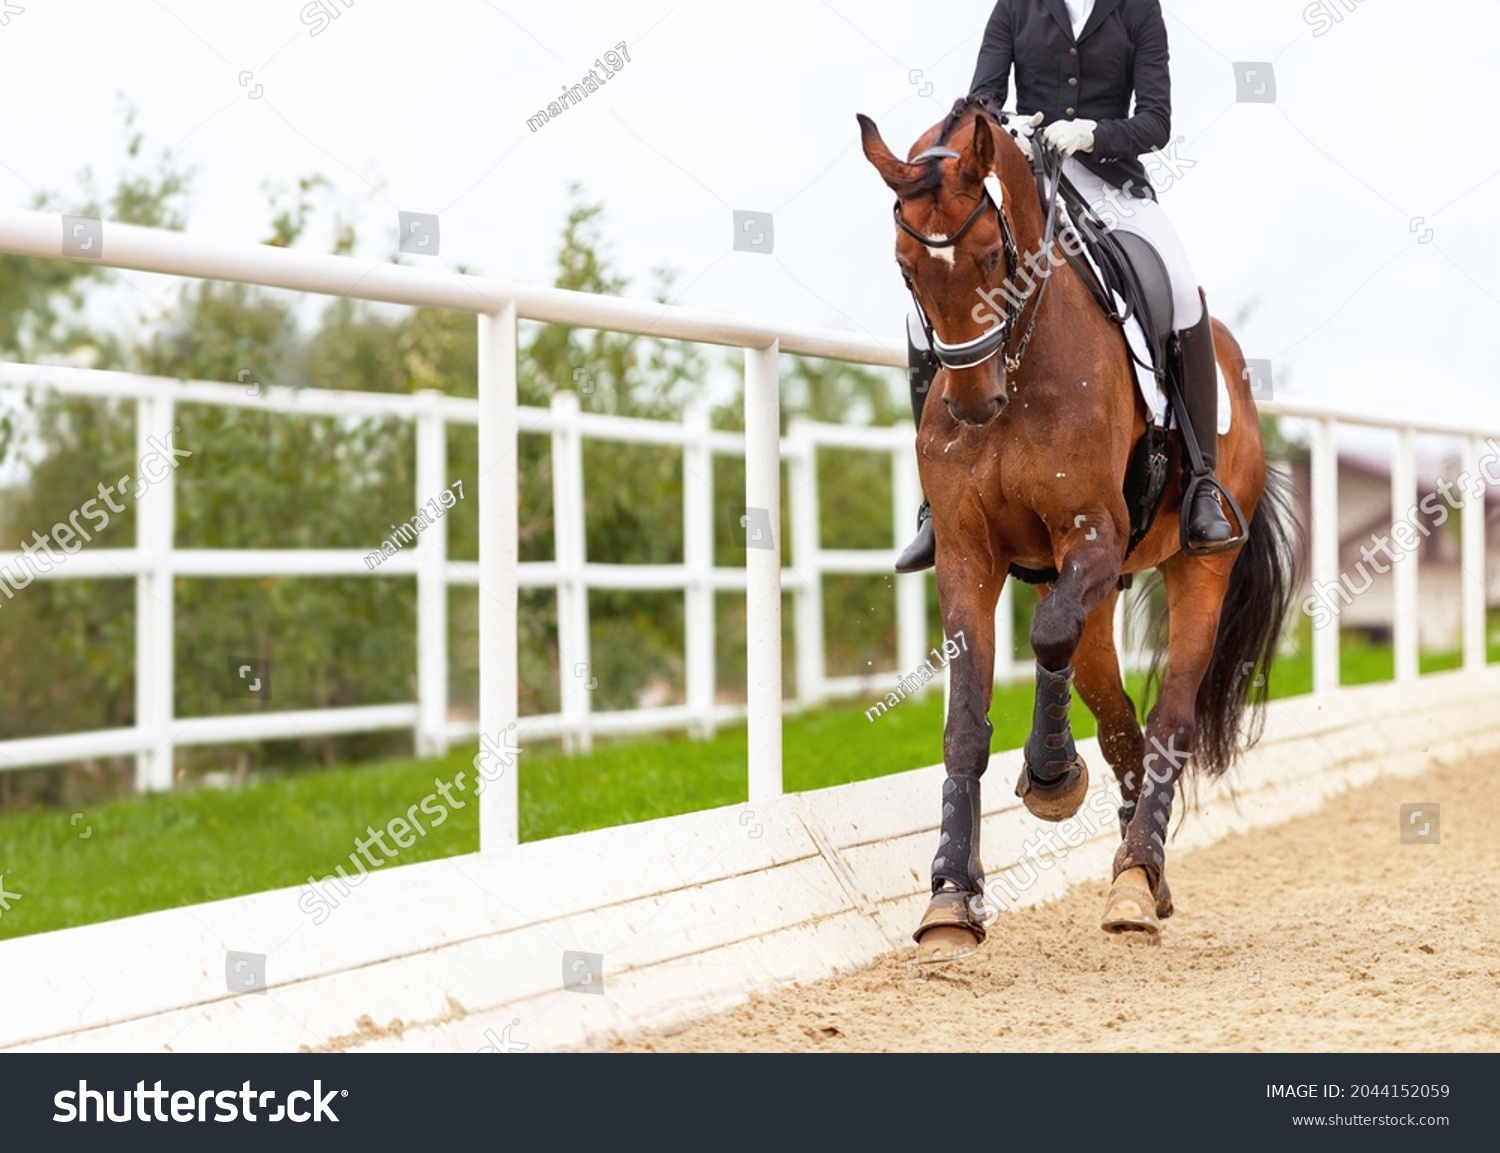 Classic Dressage horse. Horse rider girl and horse. Trot strengthening suspension. Equestrian competition show. Green outdoor trees background. Thoroughbred beautiful stallion. Banner for website #2044152059